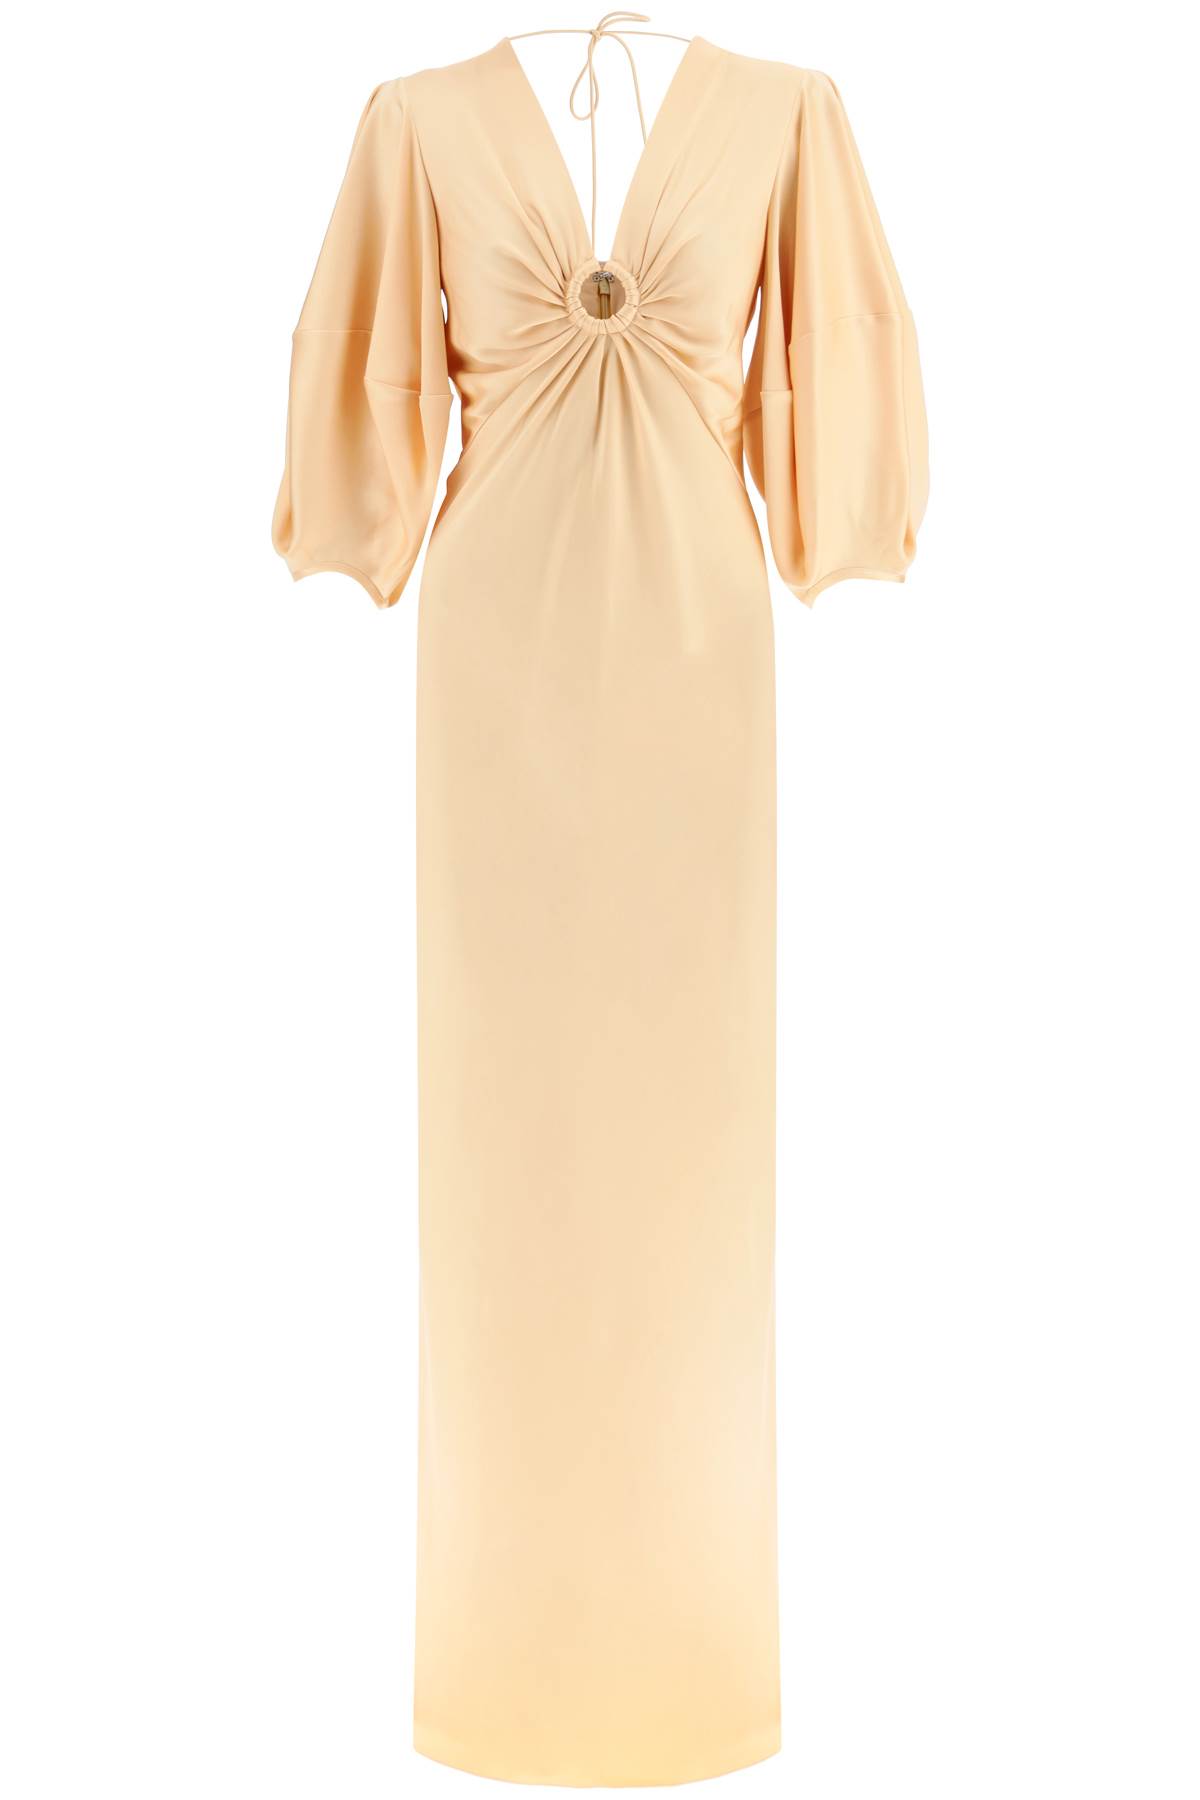 Stella McCartney Satin Maxi Dress With Cut-out Ring Detail